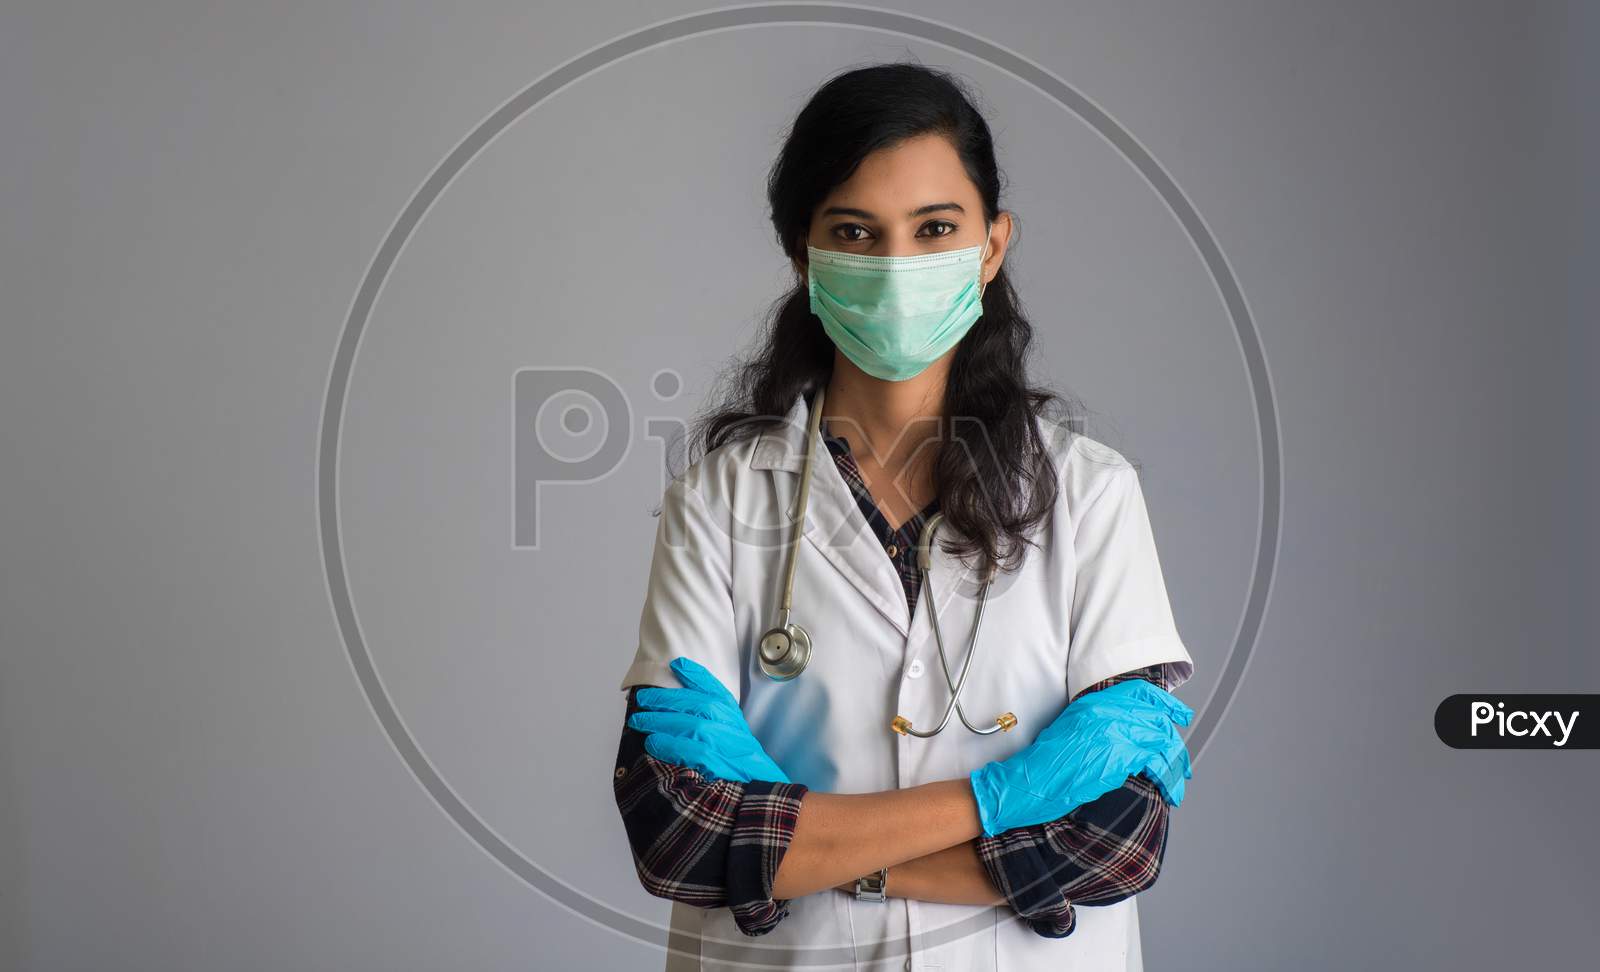 Portrait Of Woman Doctor Wearing A Protective Mask And Gloves With A Stethoscope. World Epidemic Of Coronavirus Concept.